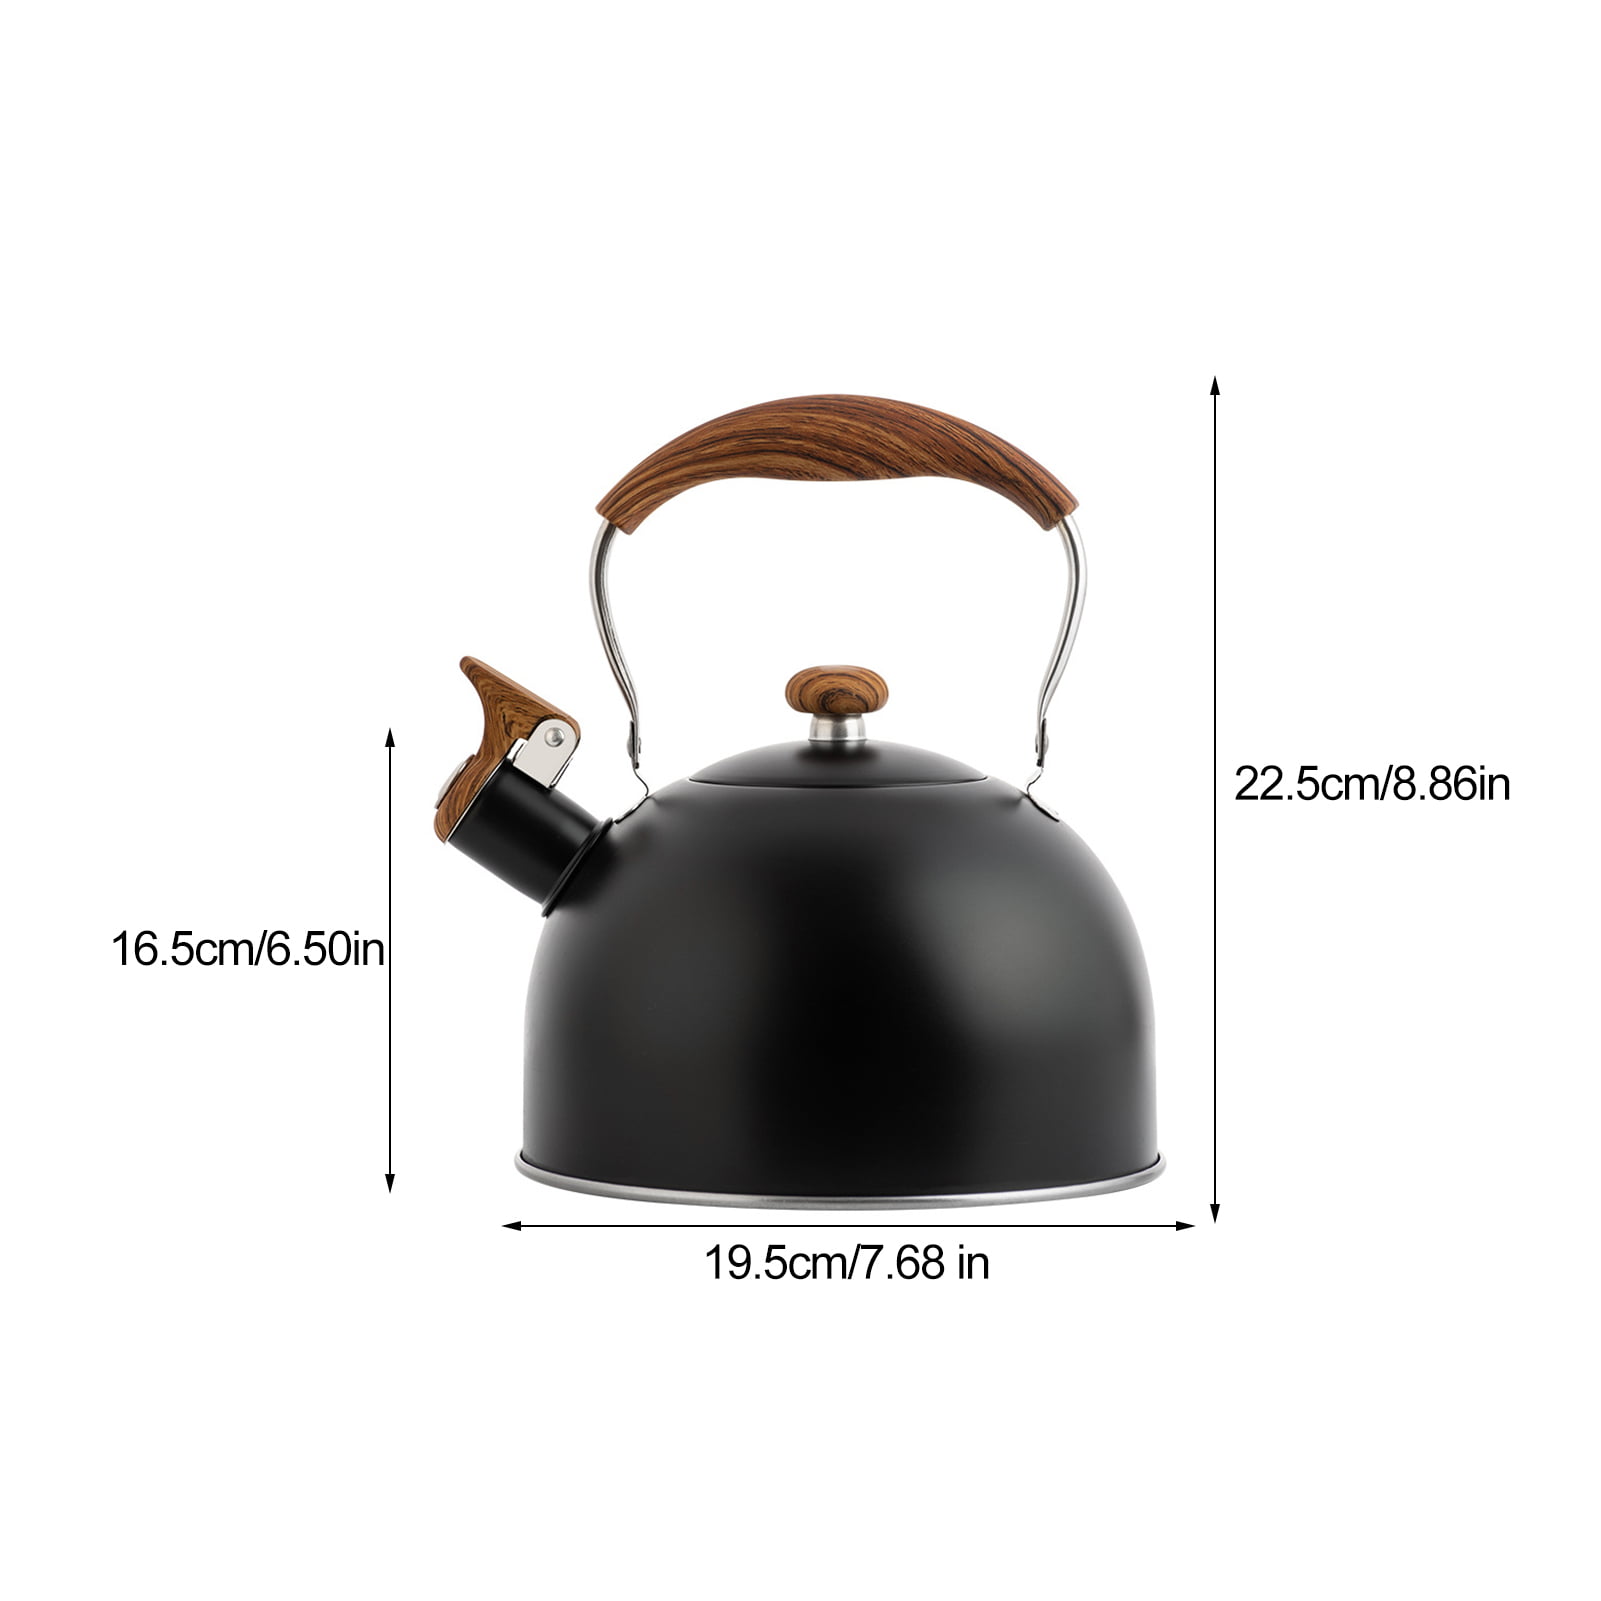 Black Large Stainless Steel Stovetop Whistling Kettle 2.5L with Anti-Heat Ergonomic Handle for Gas Stove Induction Hob 